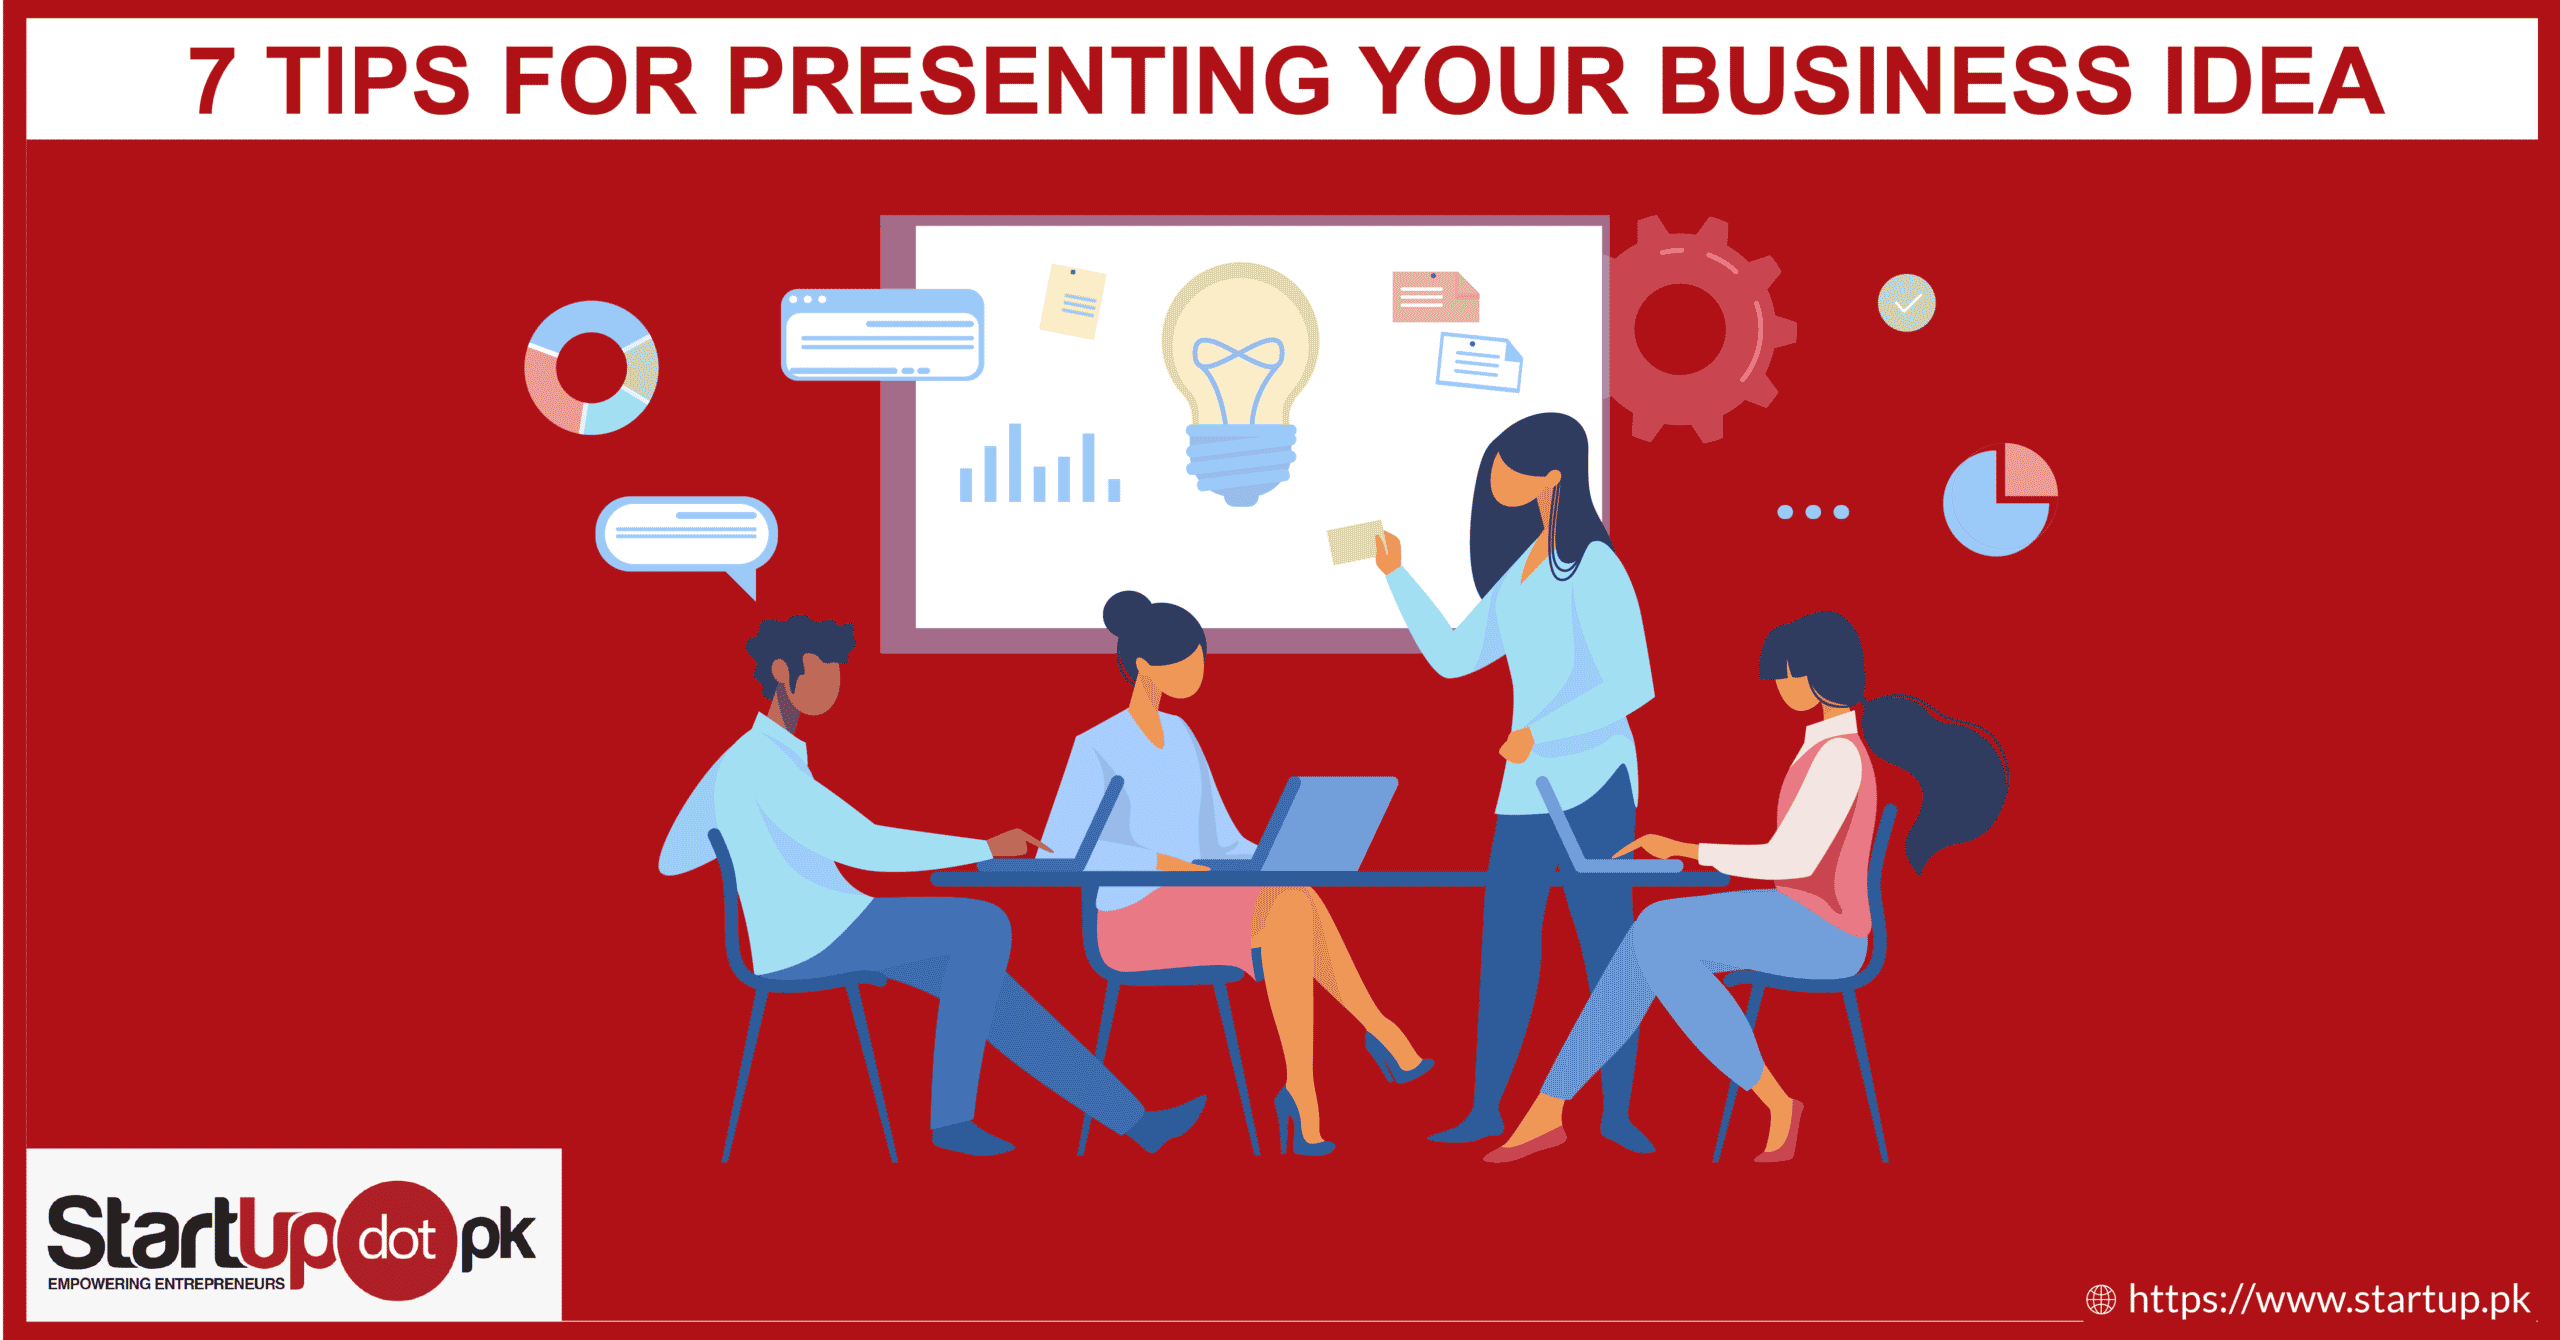 7 tips for presenting your business idea – StartupDotPK